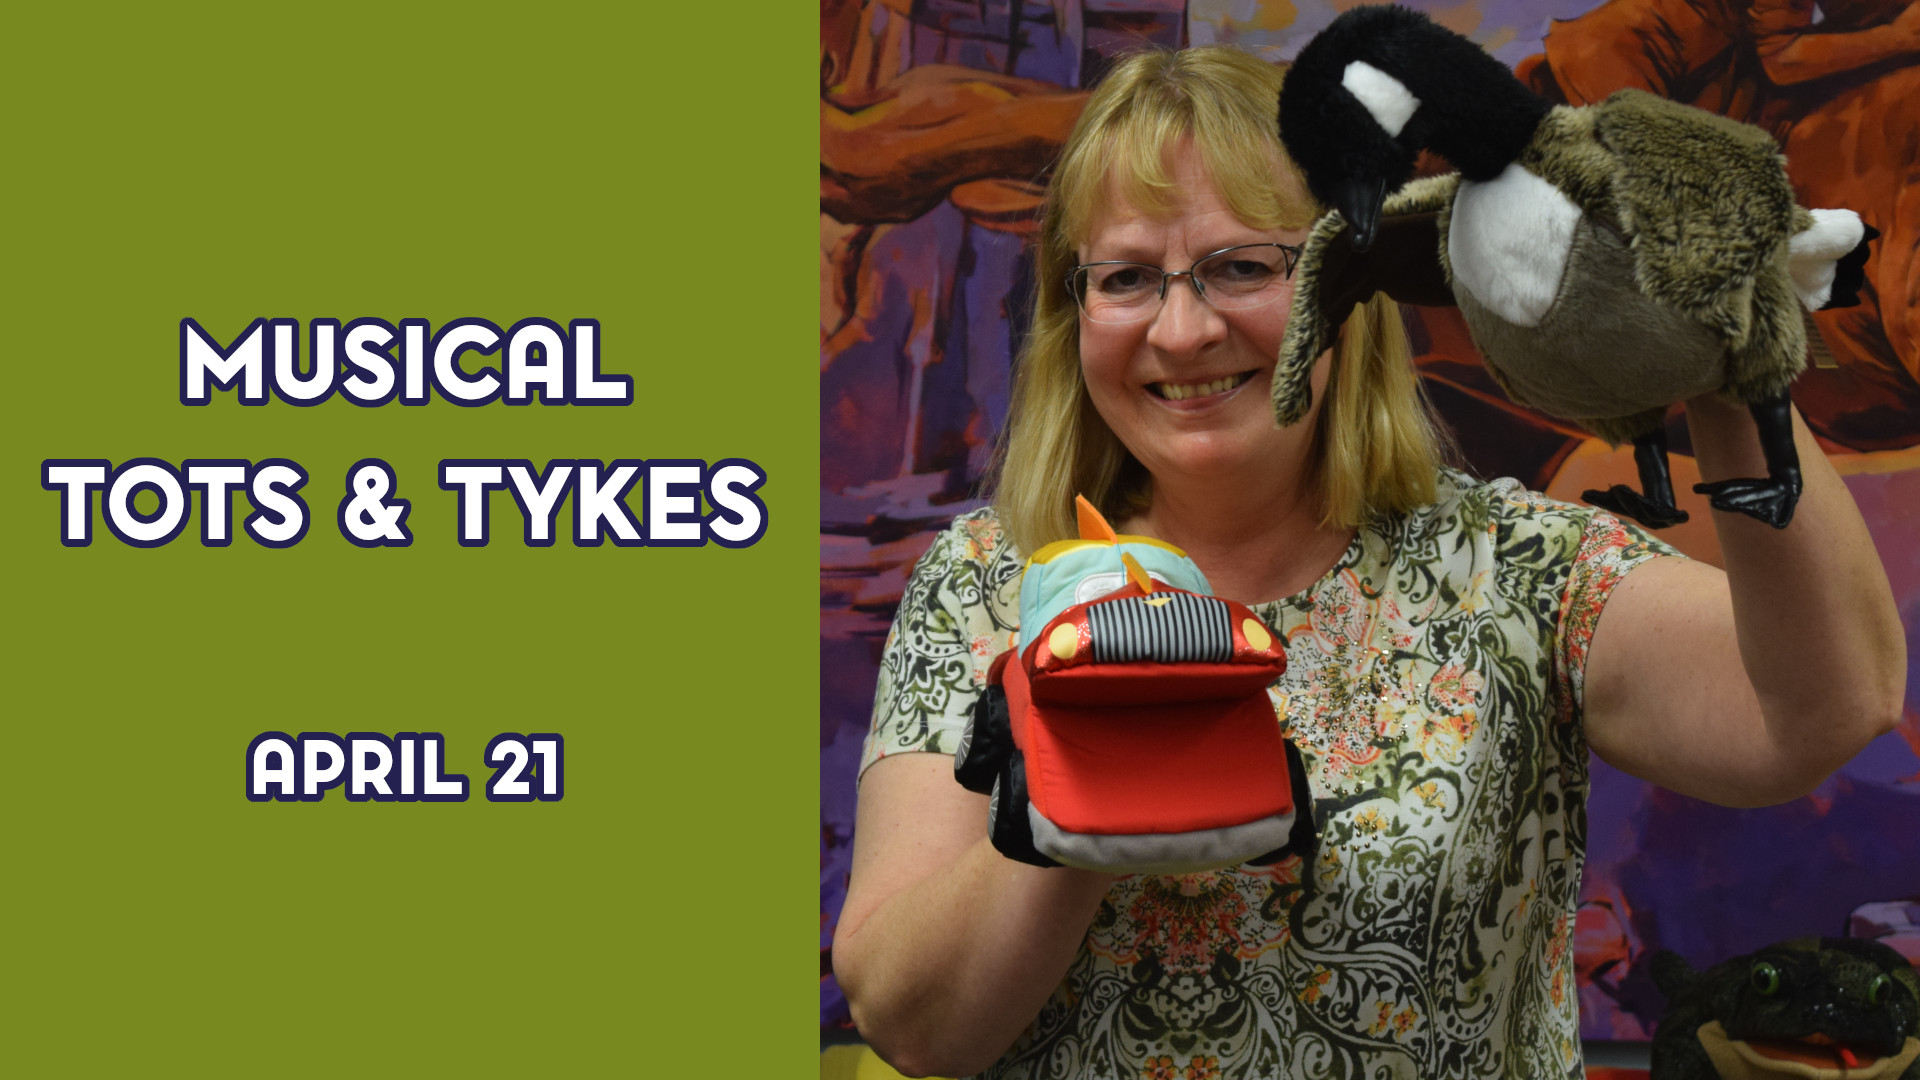 A woman holds puppets next to the text "Musical Tots & Tykes April 21"